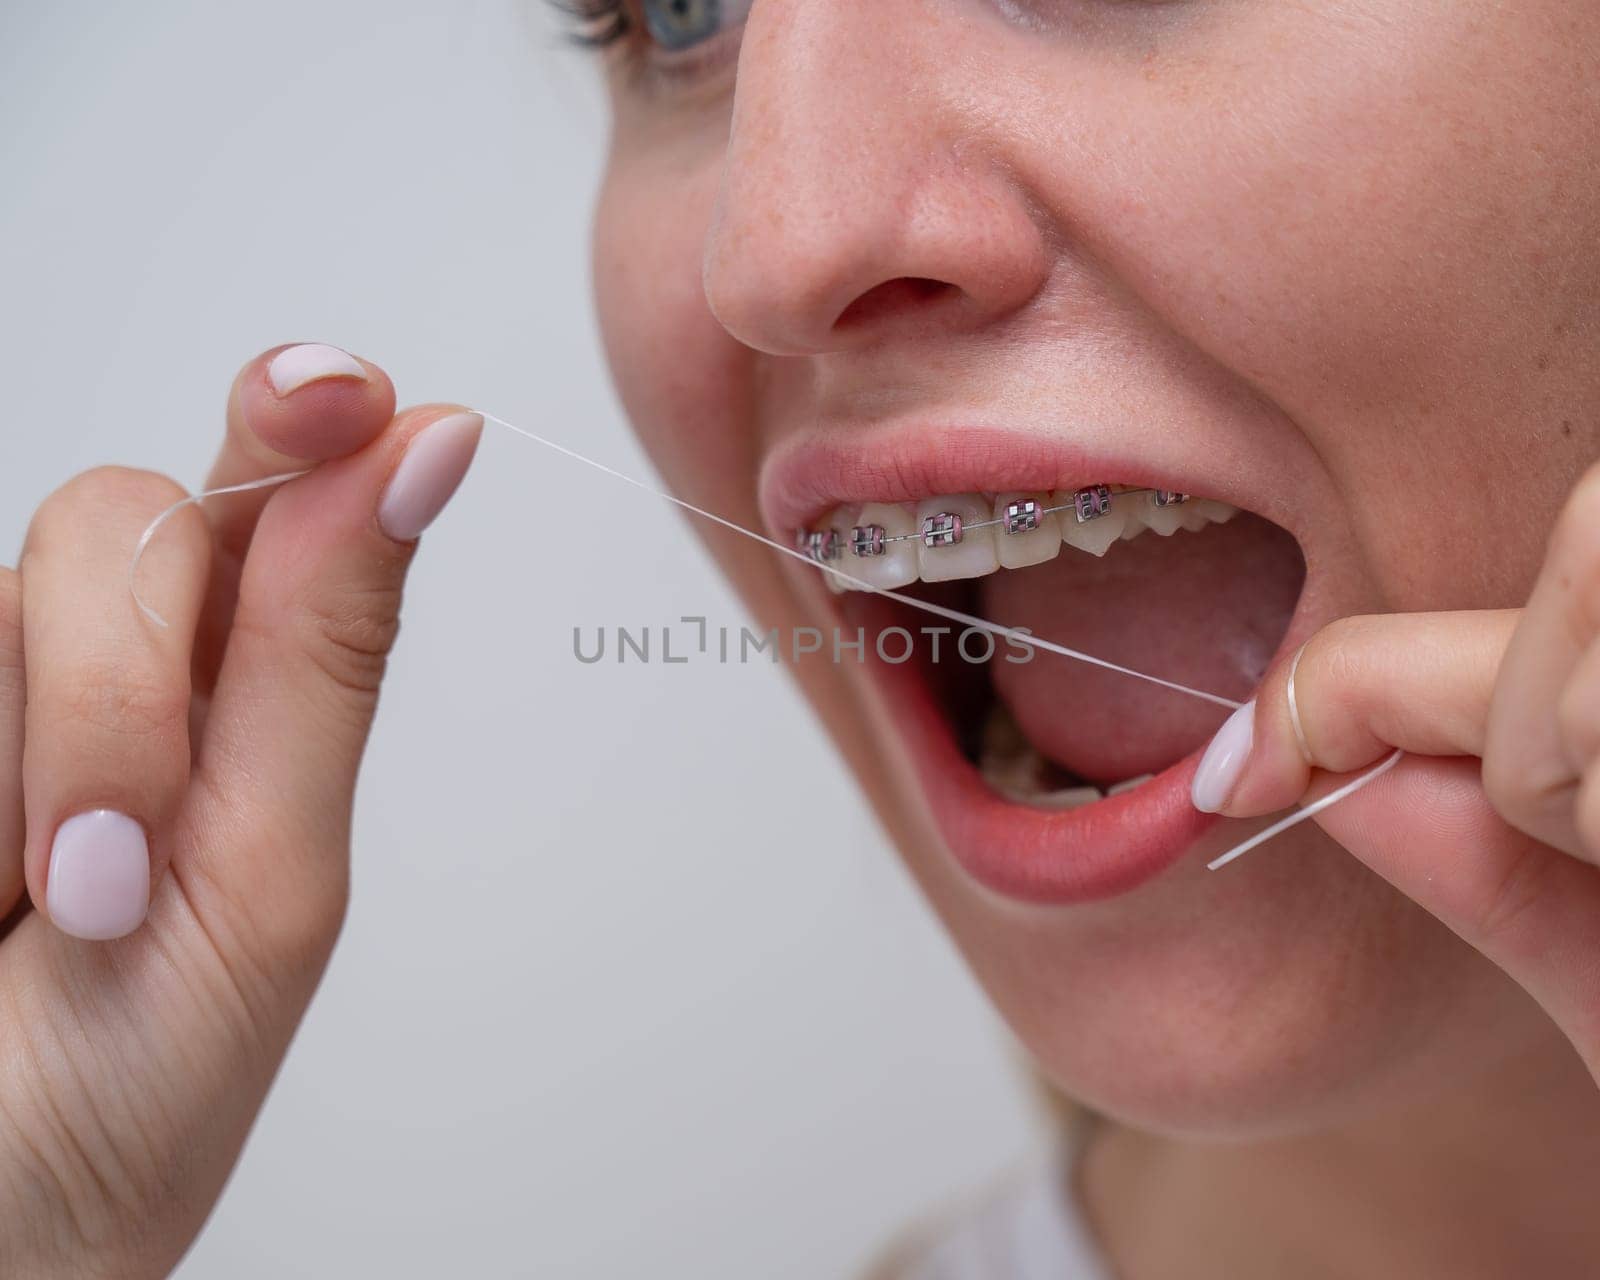 Caucasian woman cleaning her teeth with braces using dental floss. Cropped portrait. by mrwed54